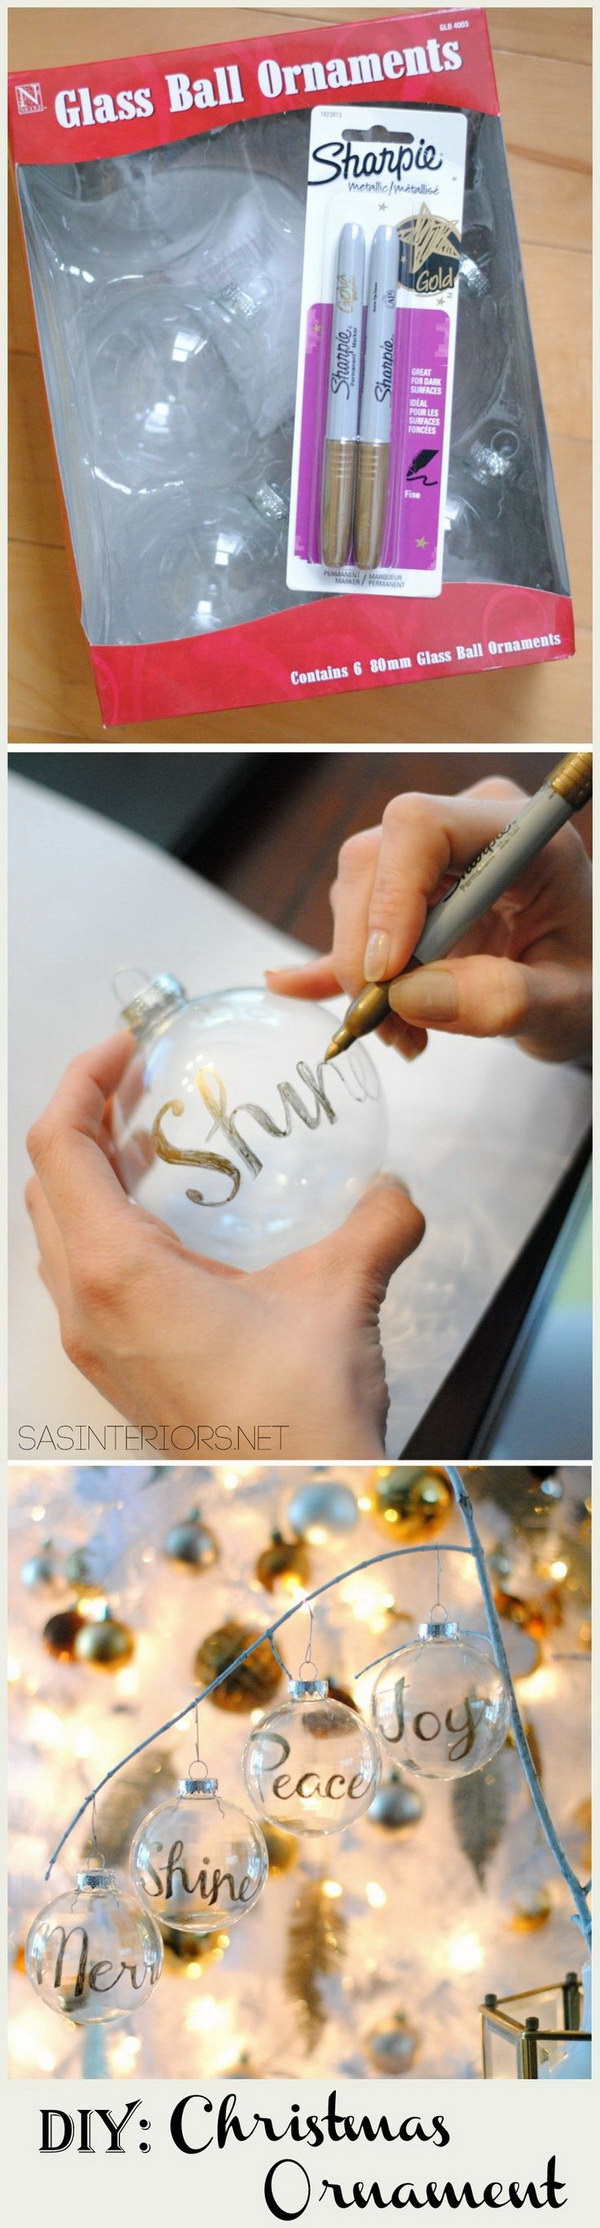 DIY Personalized Word Christmas Ornament. Get the simple Christmas ornament balls personalized with some words! 